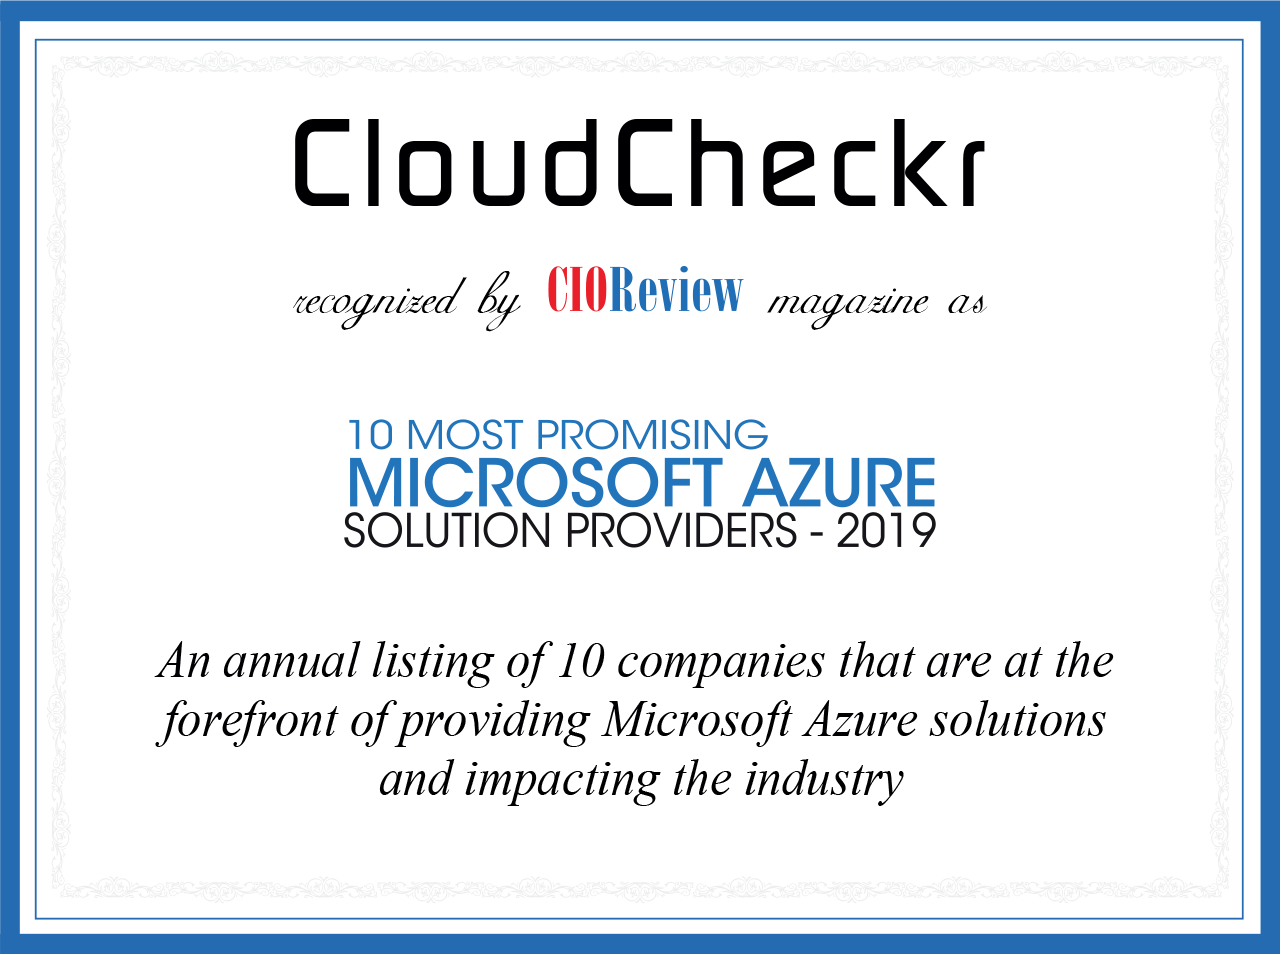 CloudCheckr is a CIOReview 'Top 10 Most Promising Microsoft Azure Solution Partner' of 2019